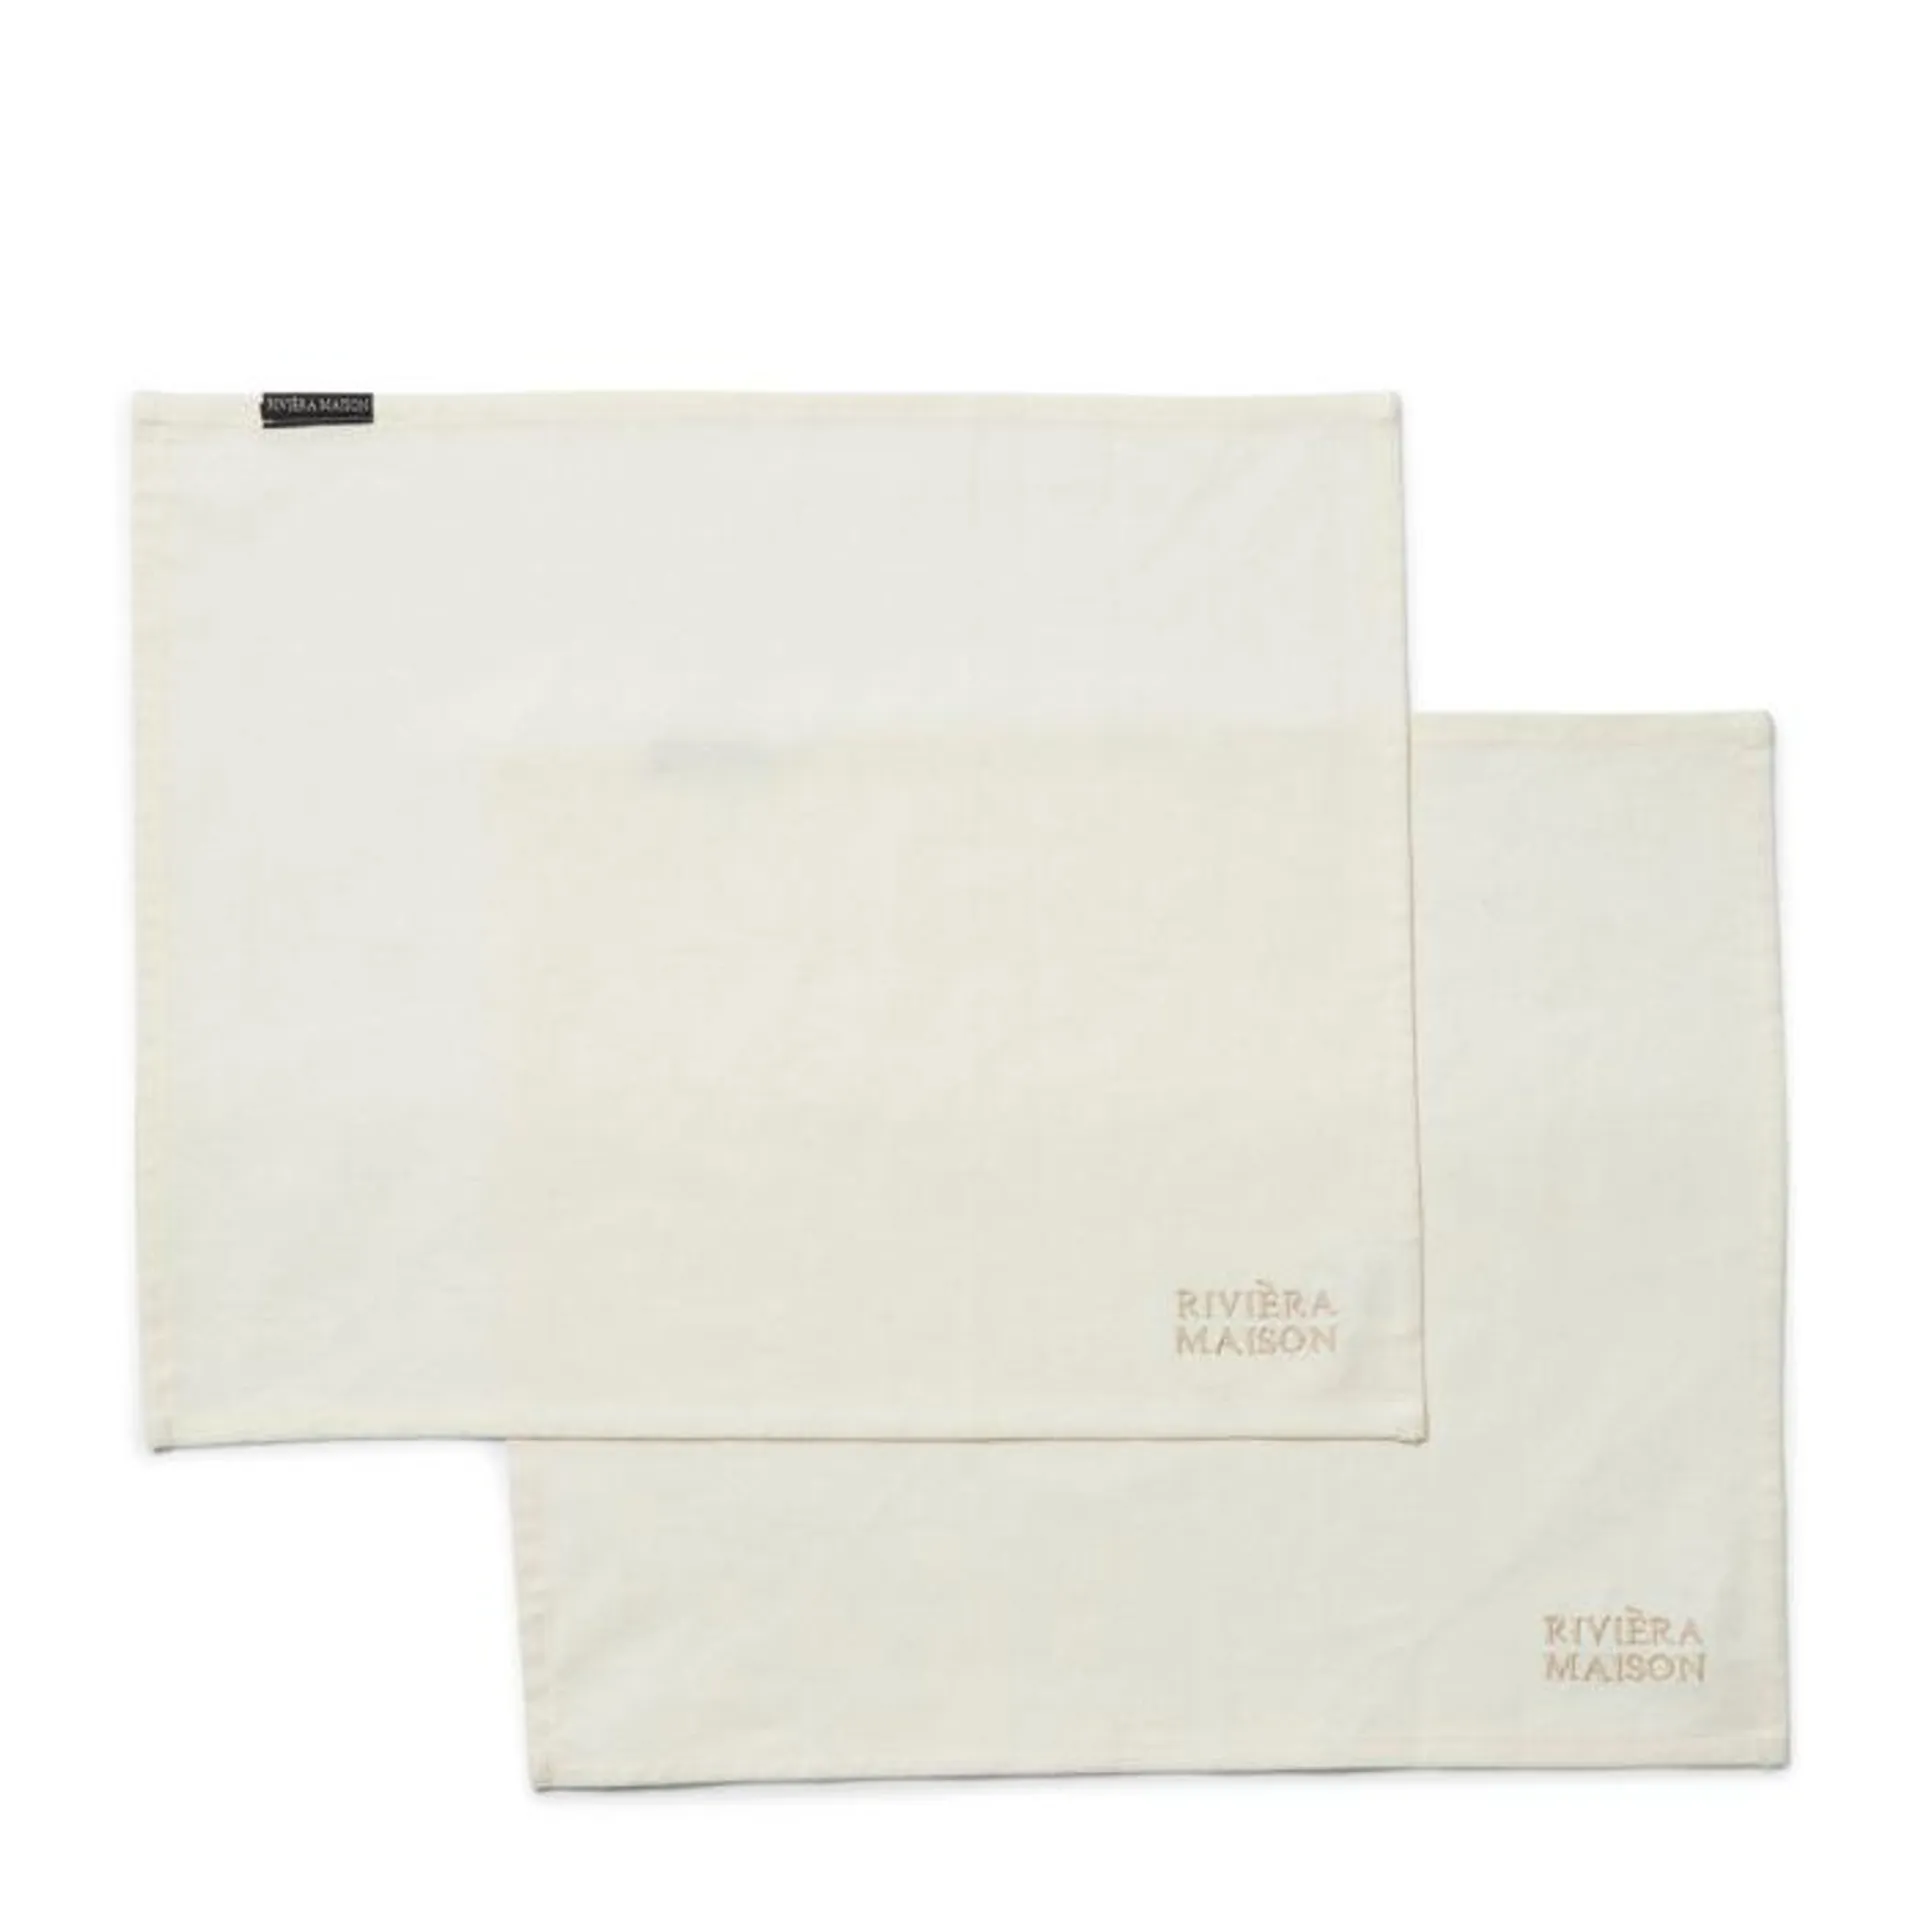 Placemat RM Classic, White, 2 Pieces